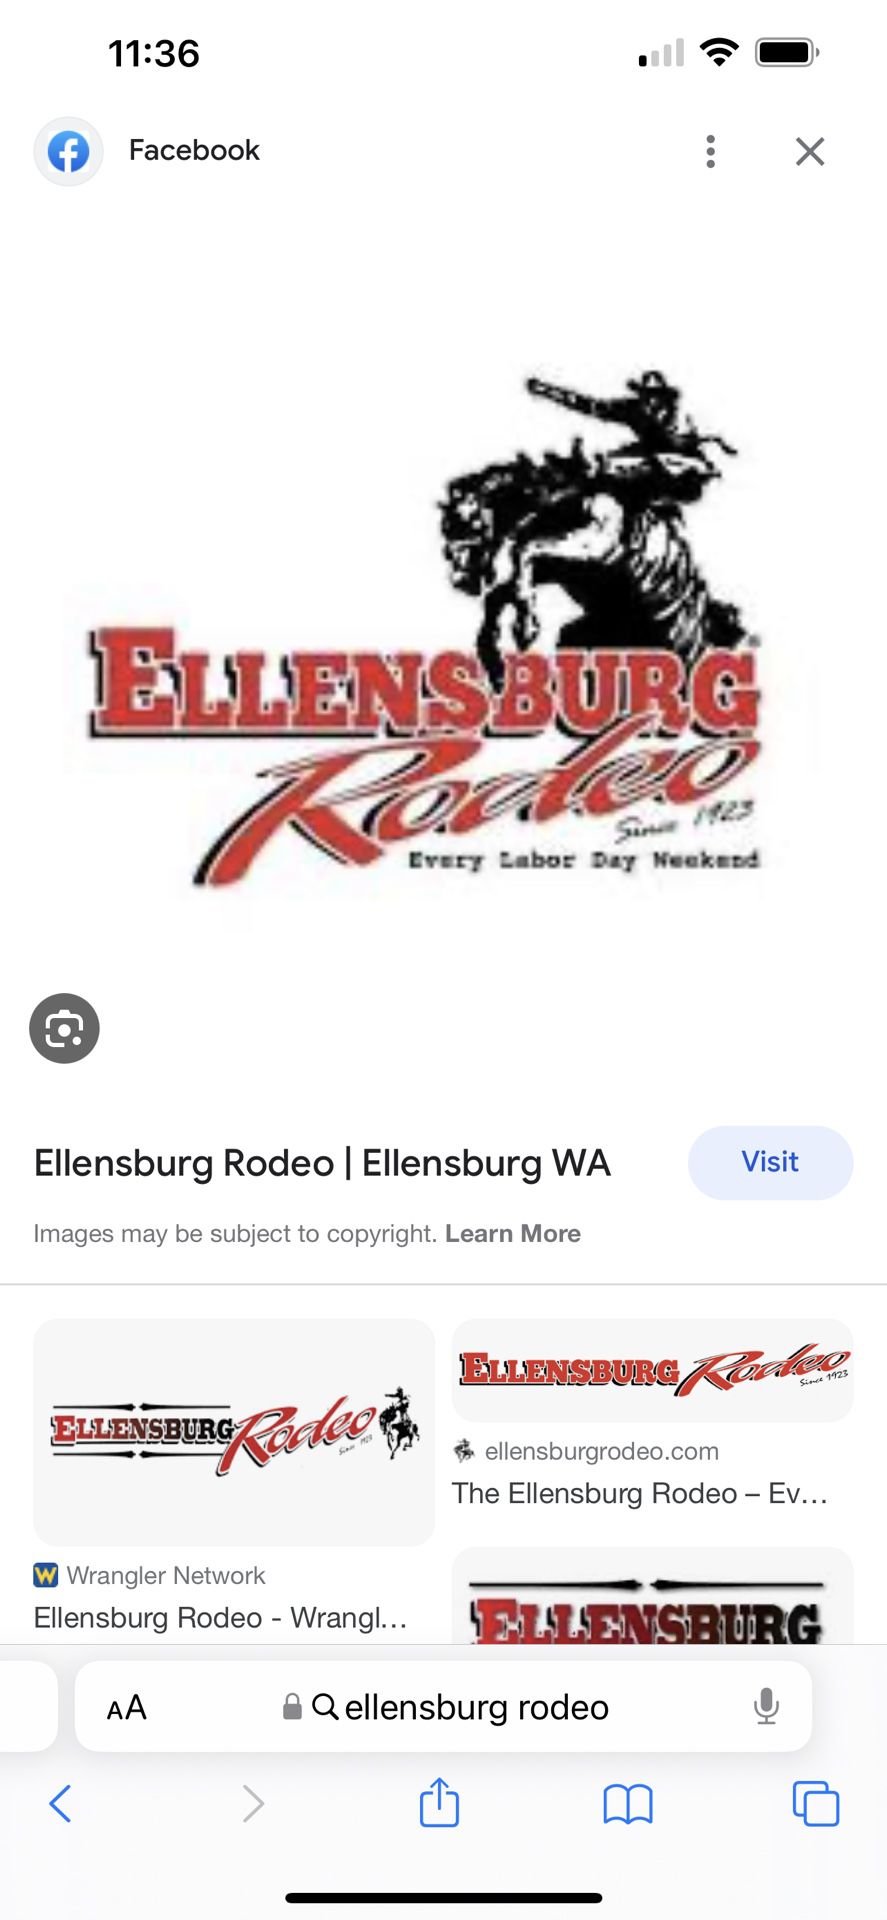 Tickets to Ellensburg Rodeo for today ~ Sunday ~ Free